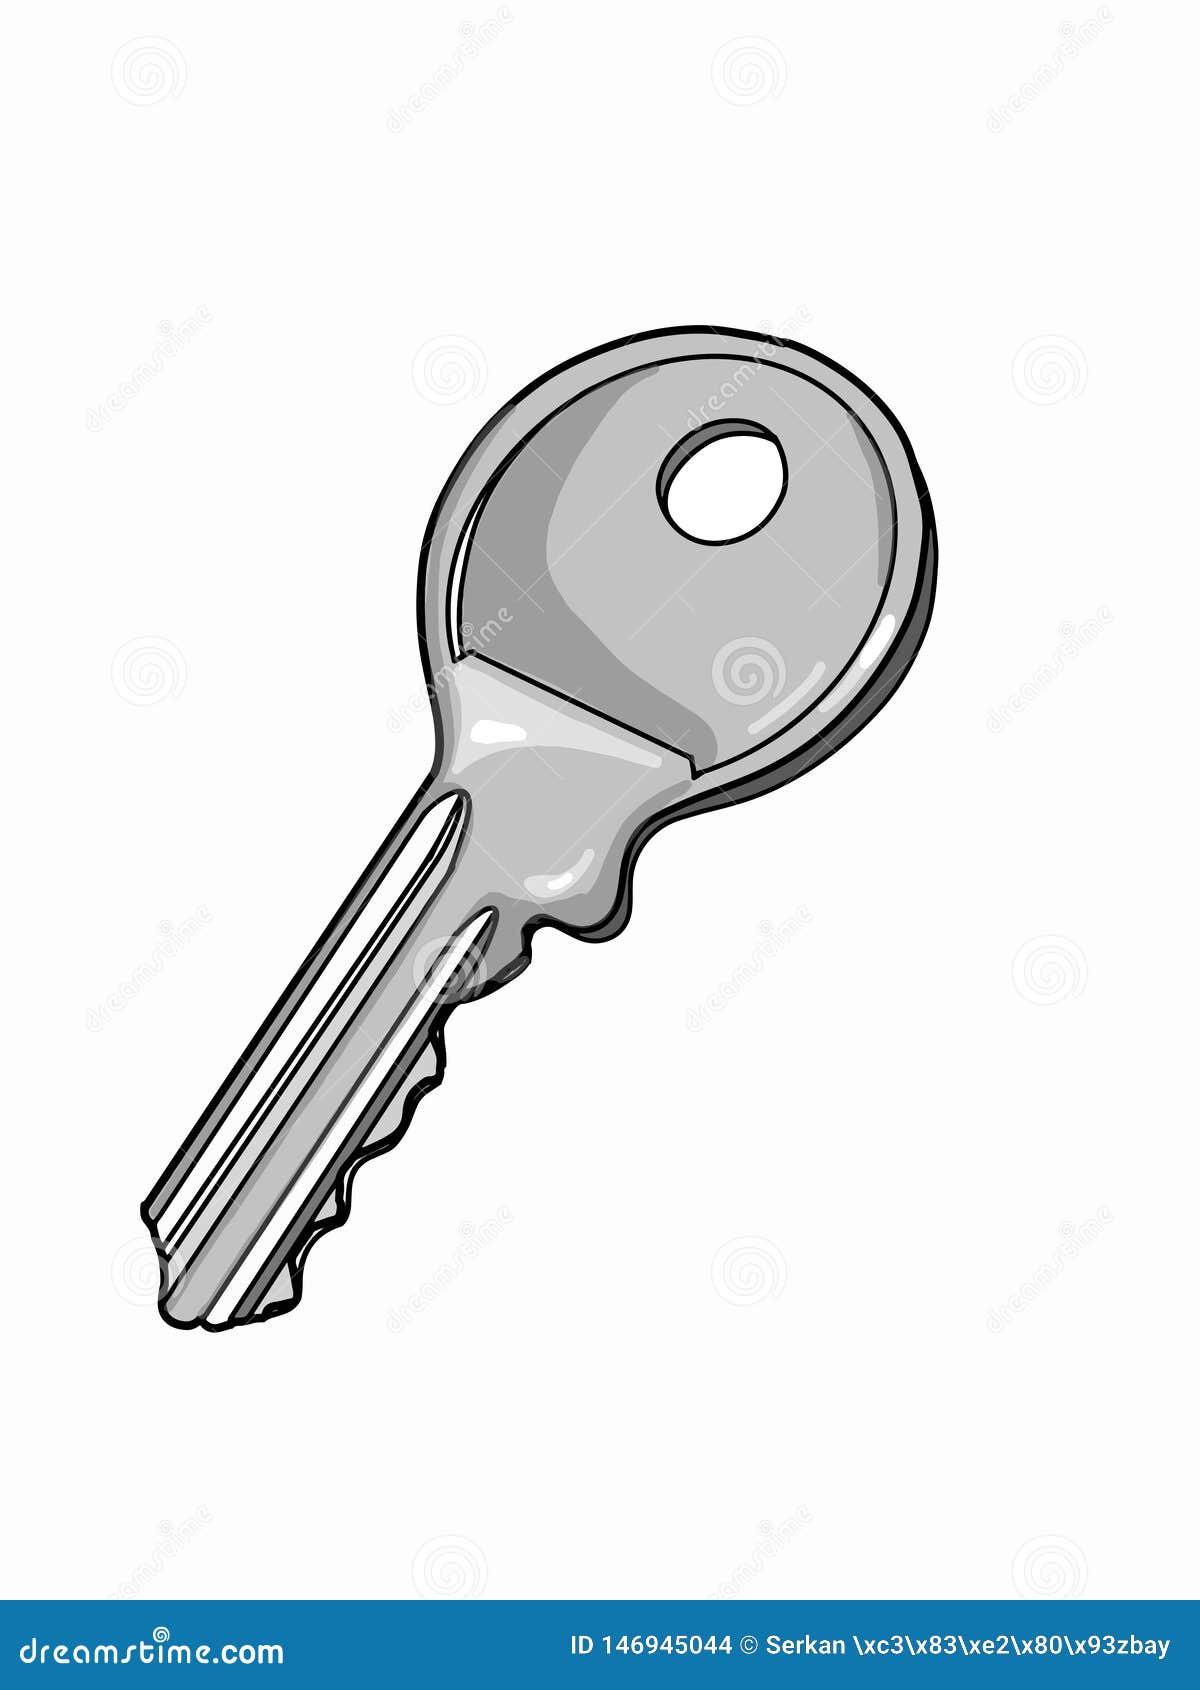 Key Illustration Drawing Line Cartoon White Background Illustration Stock  Illustration - Illustration of password, safety: 146945044